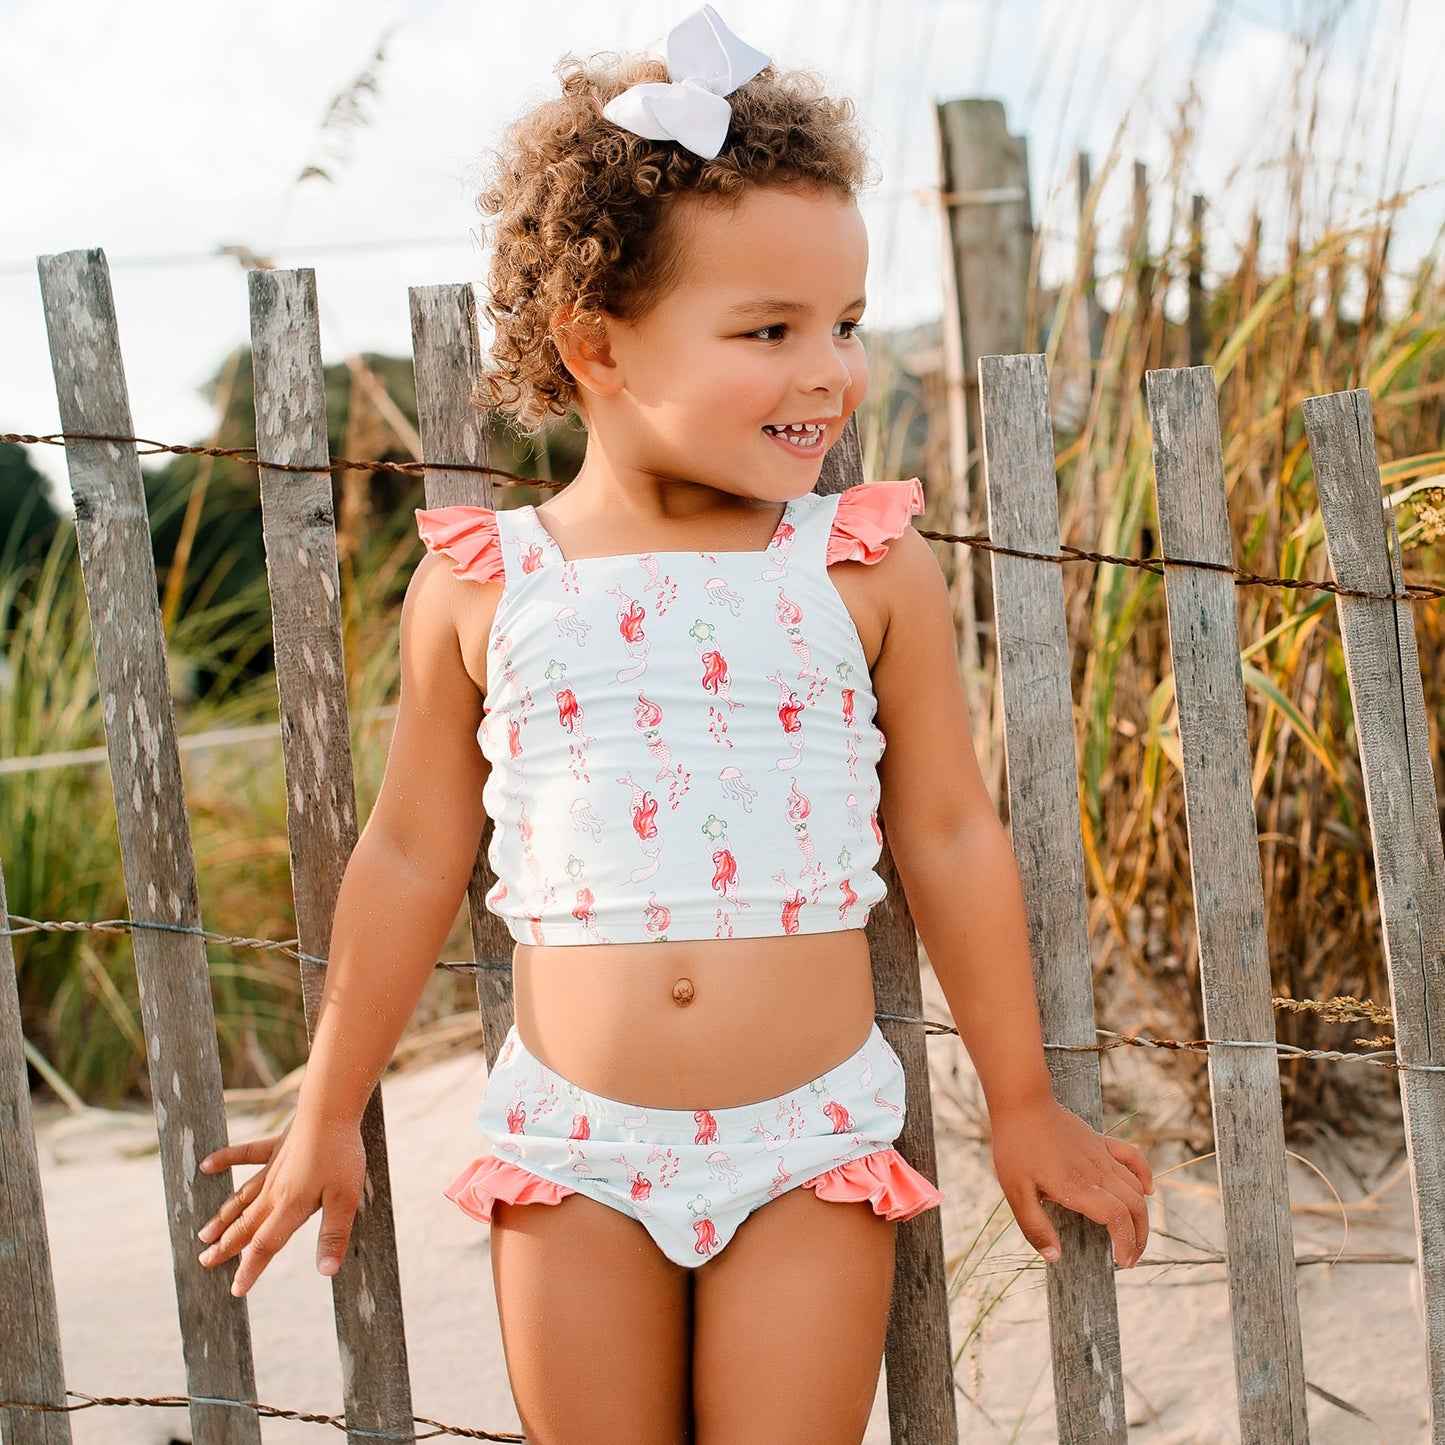 little girl at the beach smiling by a fence post